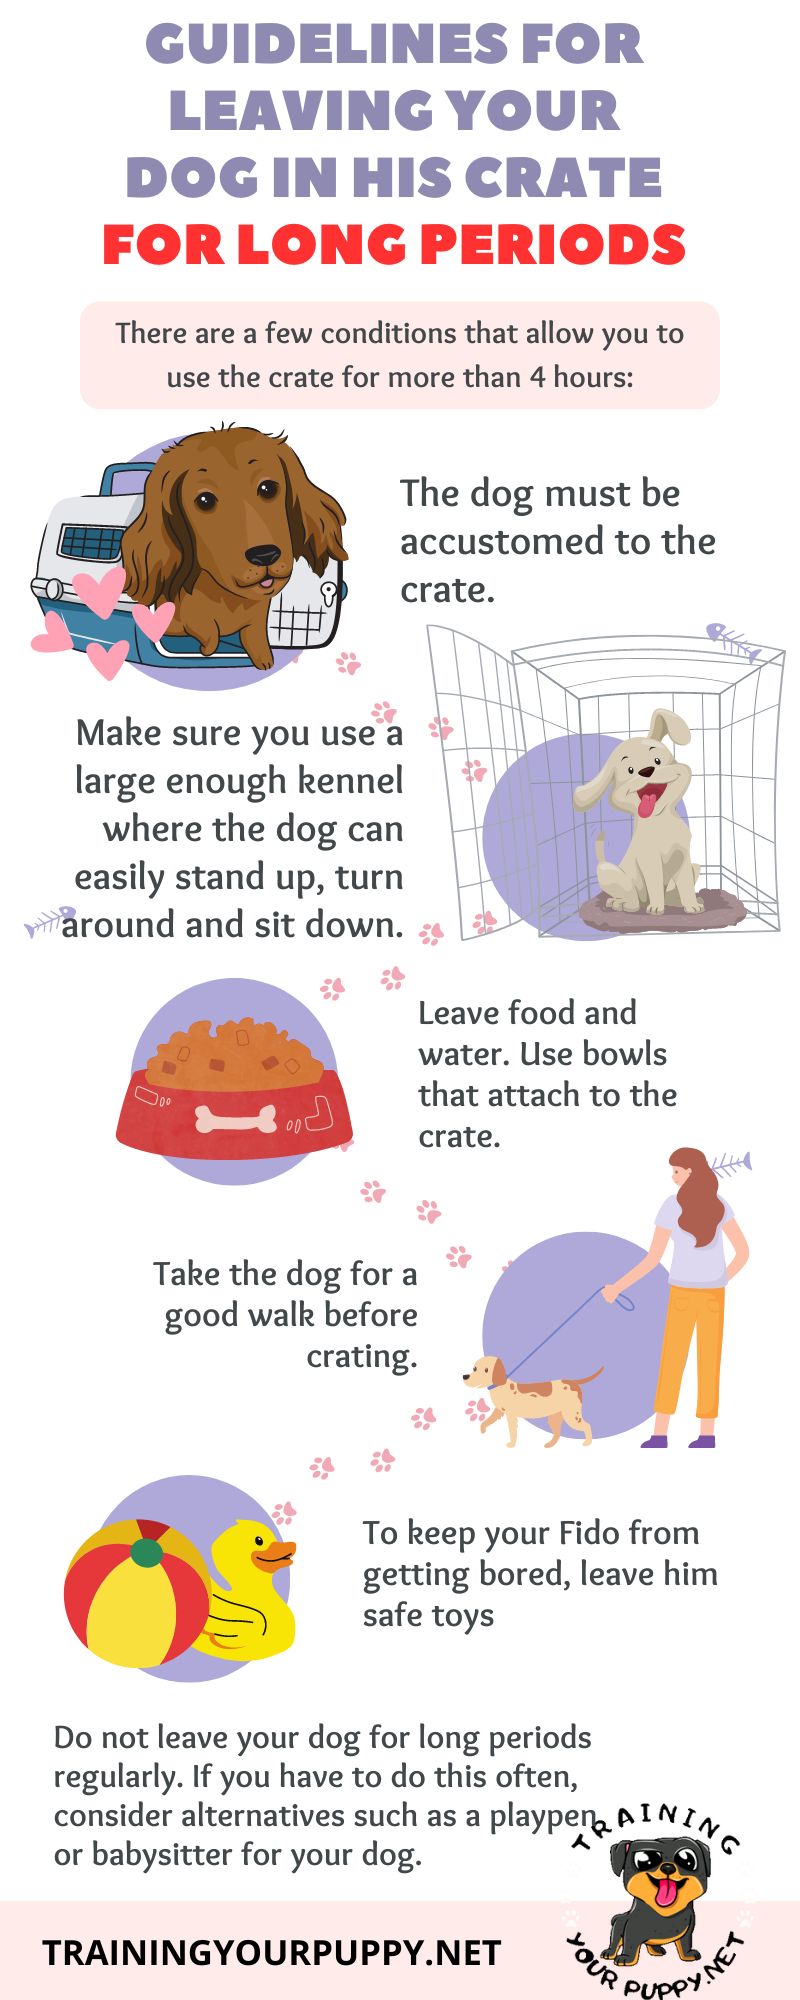 Guidelines for leaving your dog in his crate for long periods